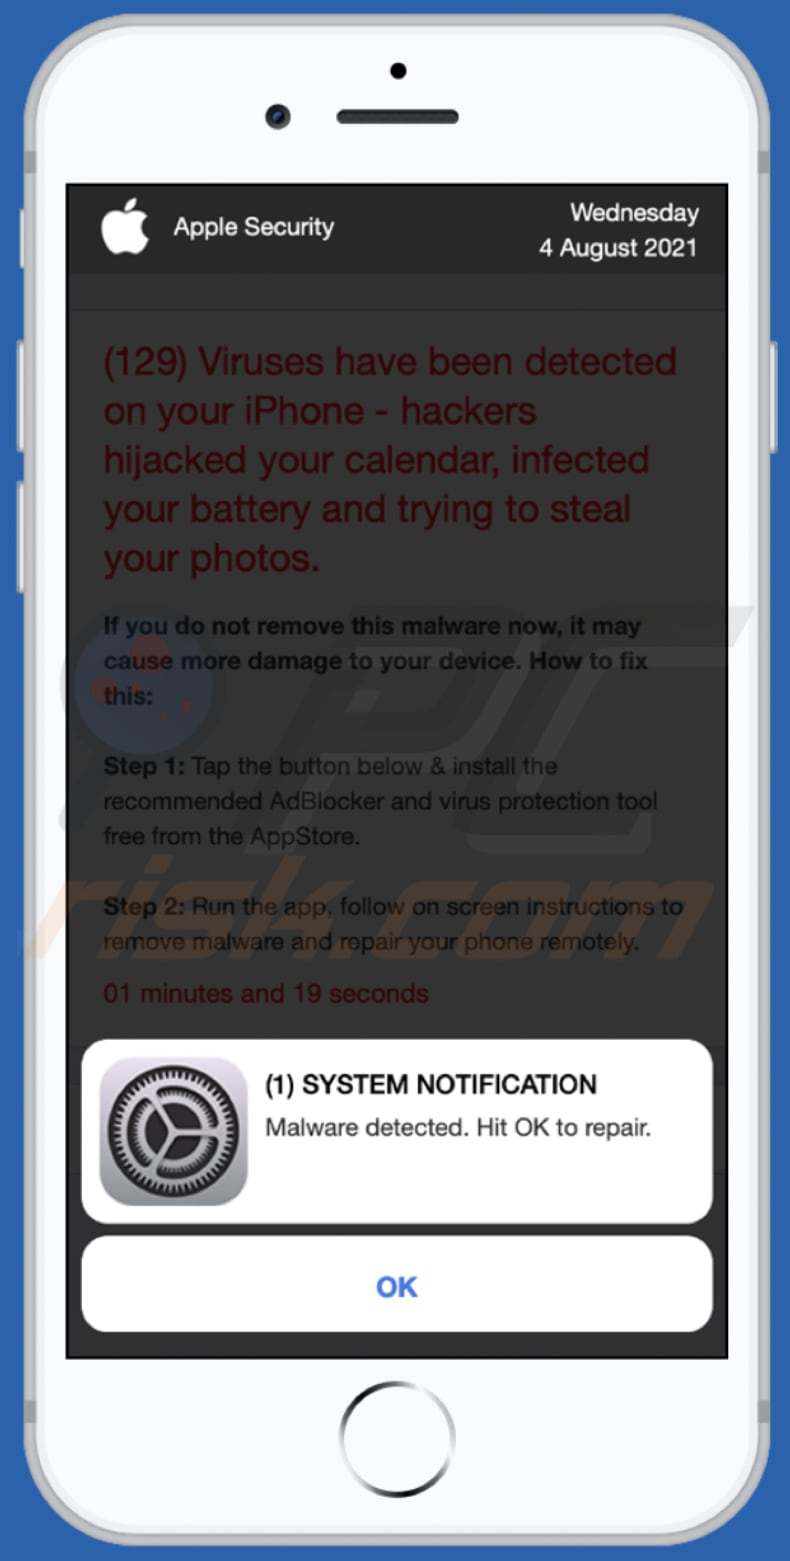 Oszustwo Hackers hijacked your calendar, infected your battery